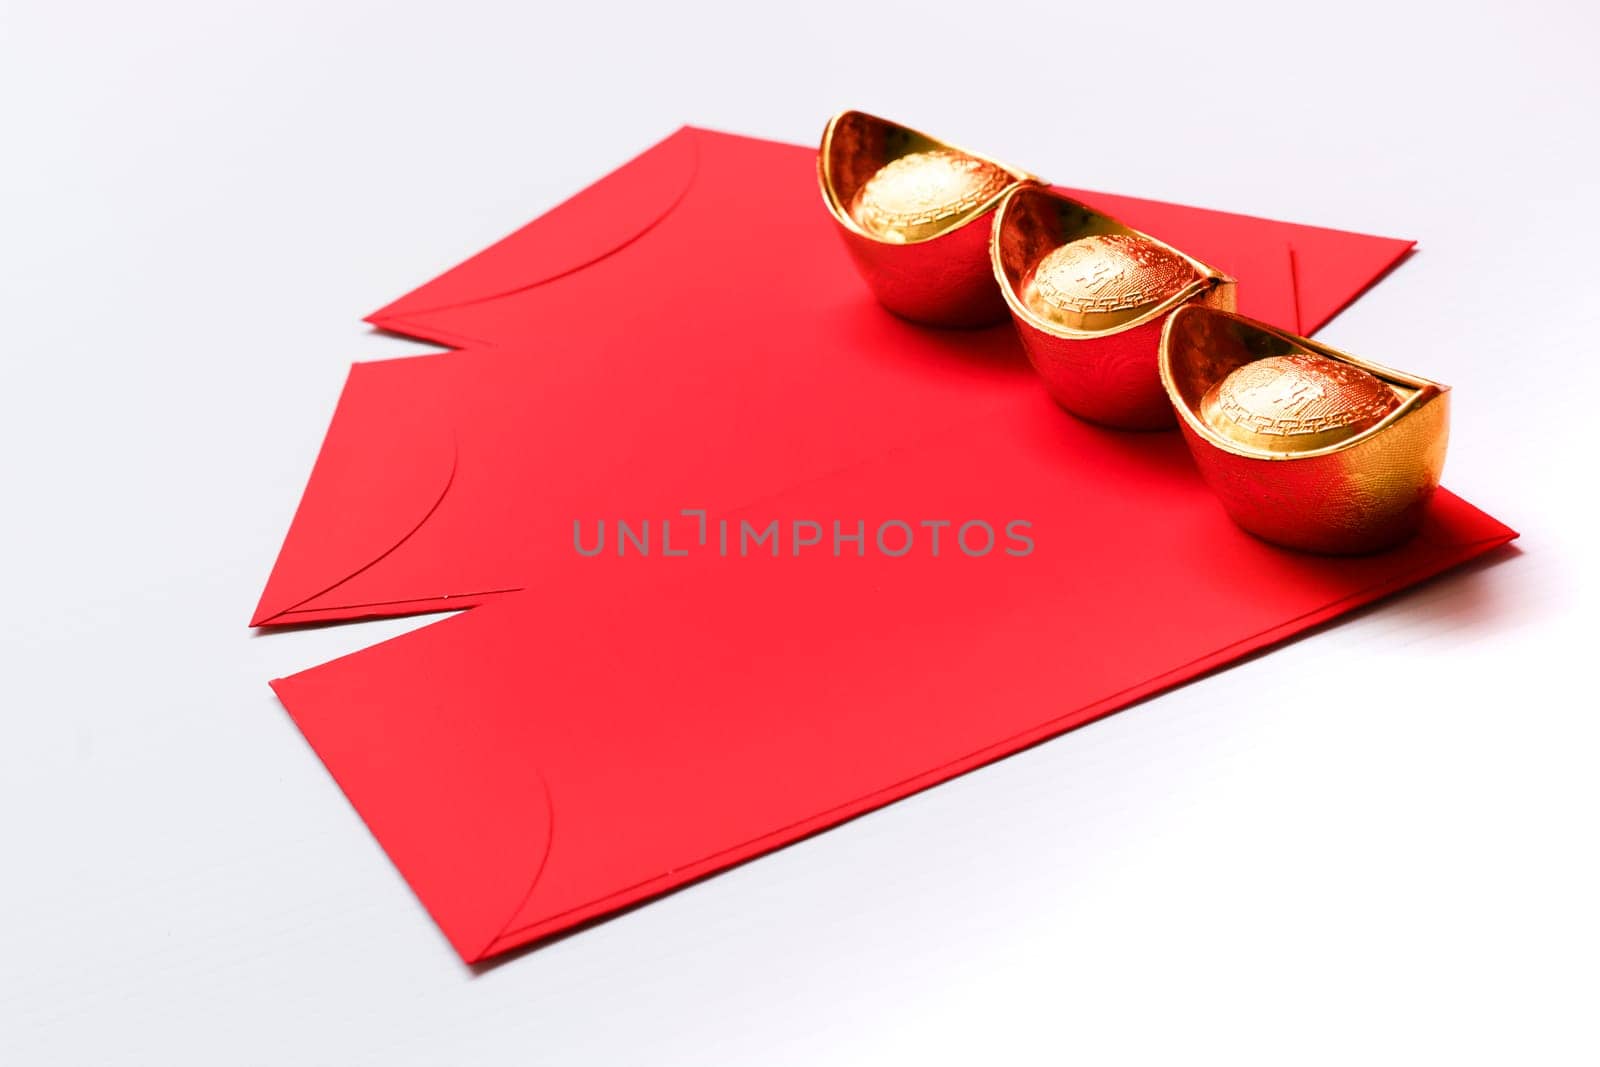 Chinese New Year Spring festival decorations red packet and gold ingots on white background.